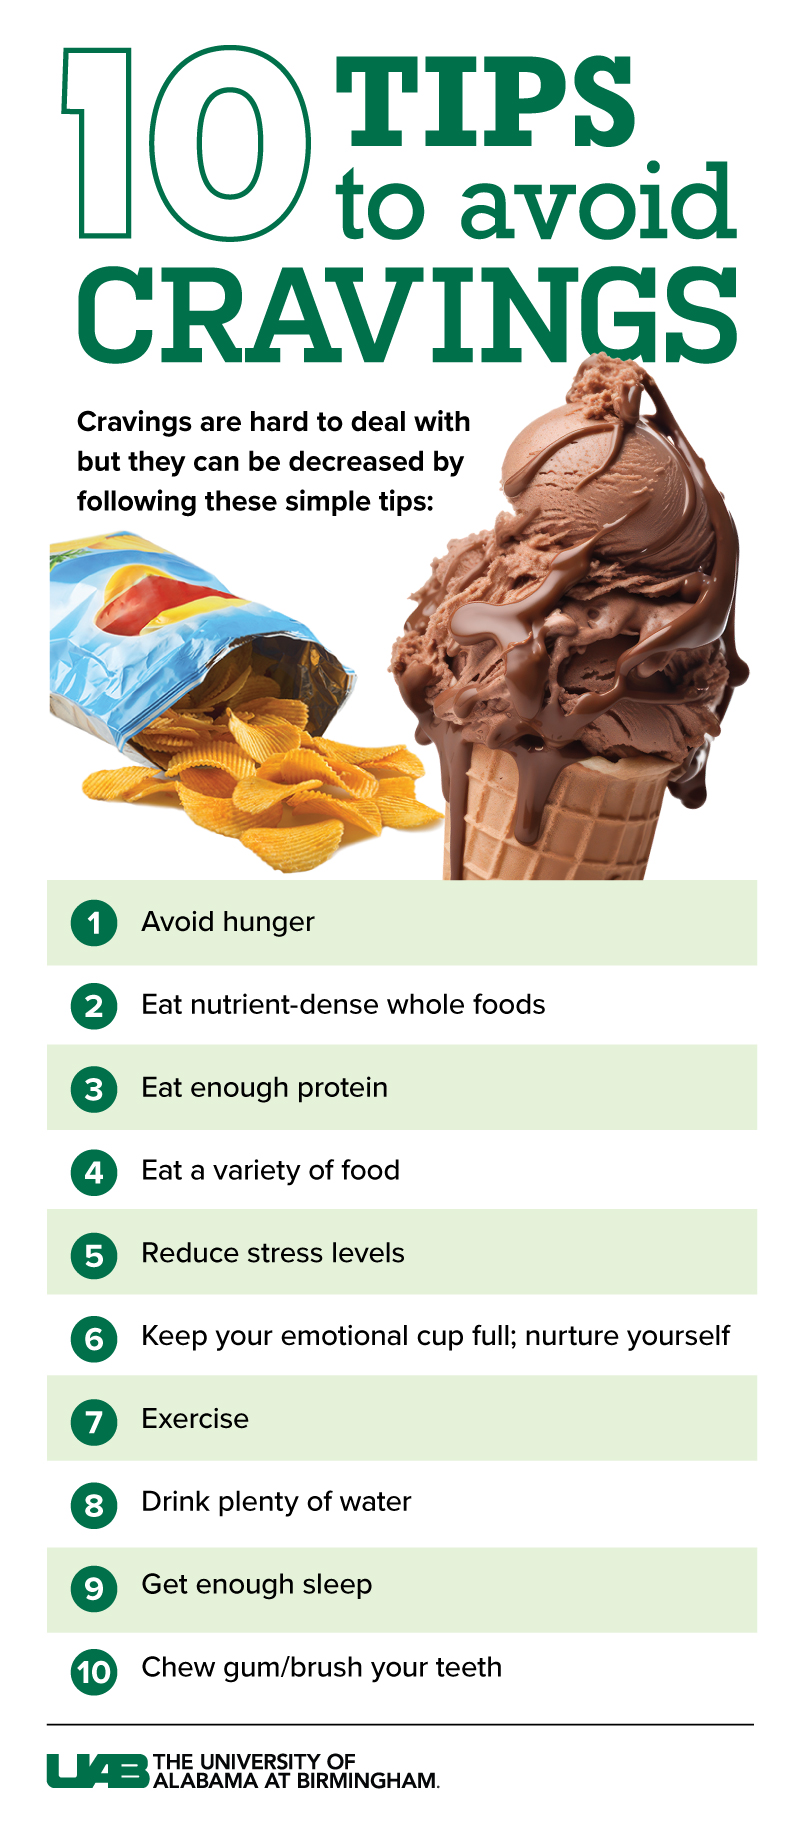 Tips to avoid cravings graphic